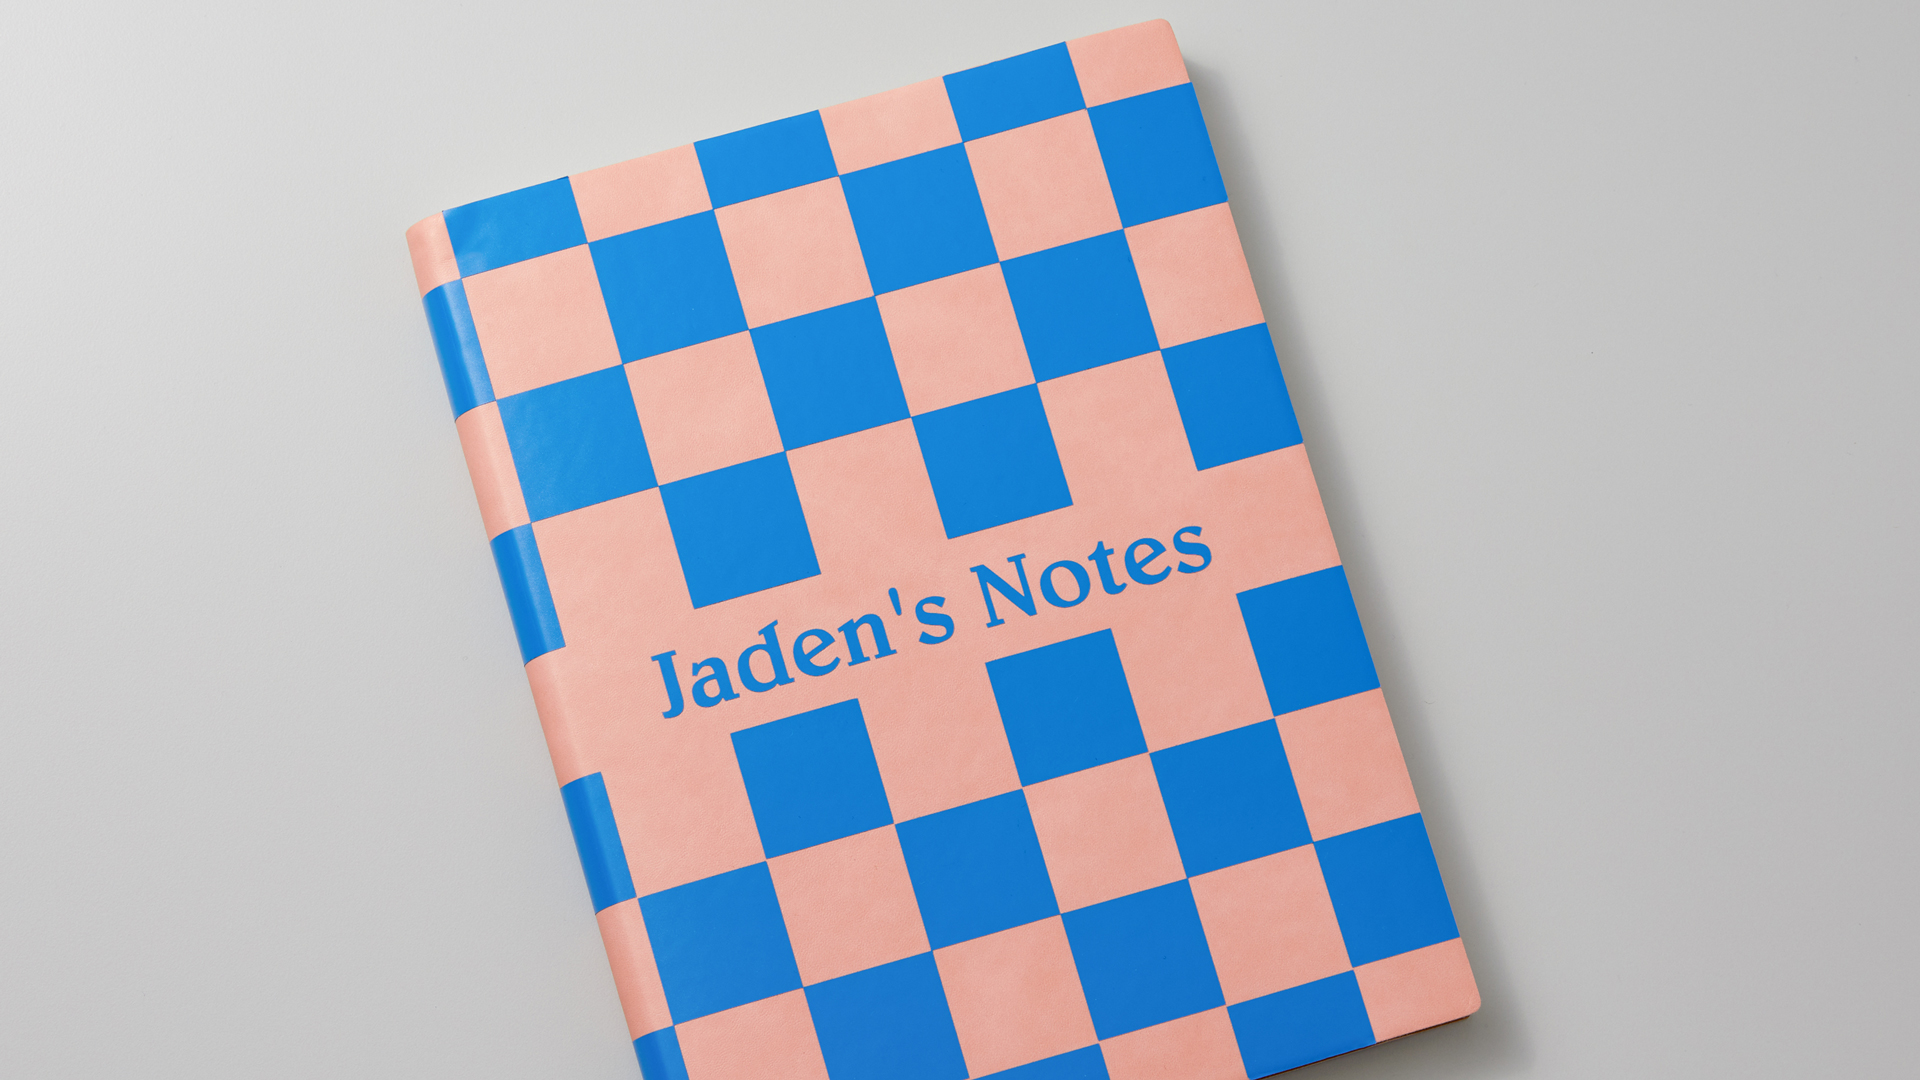 Personalized pink notebook with blue checkered design and "Jaden's Notes" across the middle of the book cover.